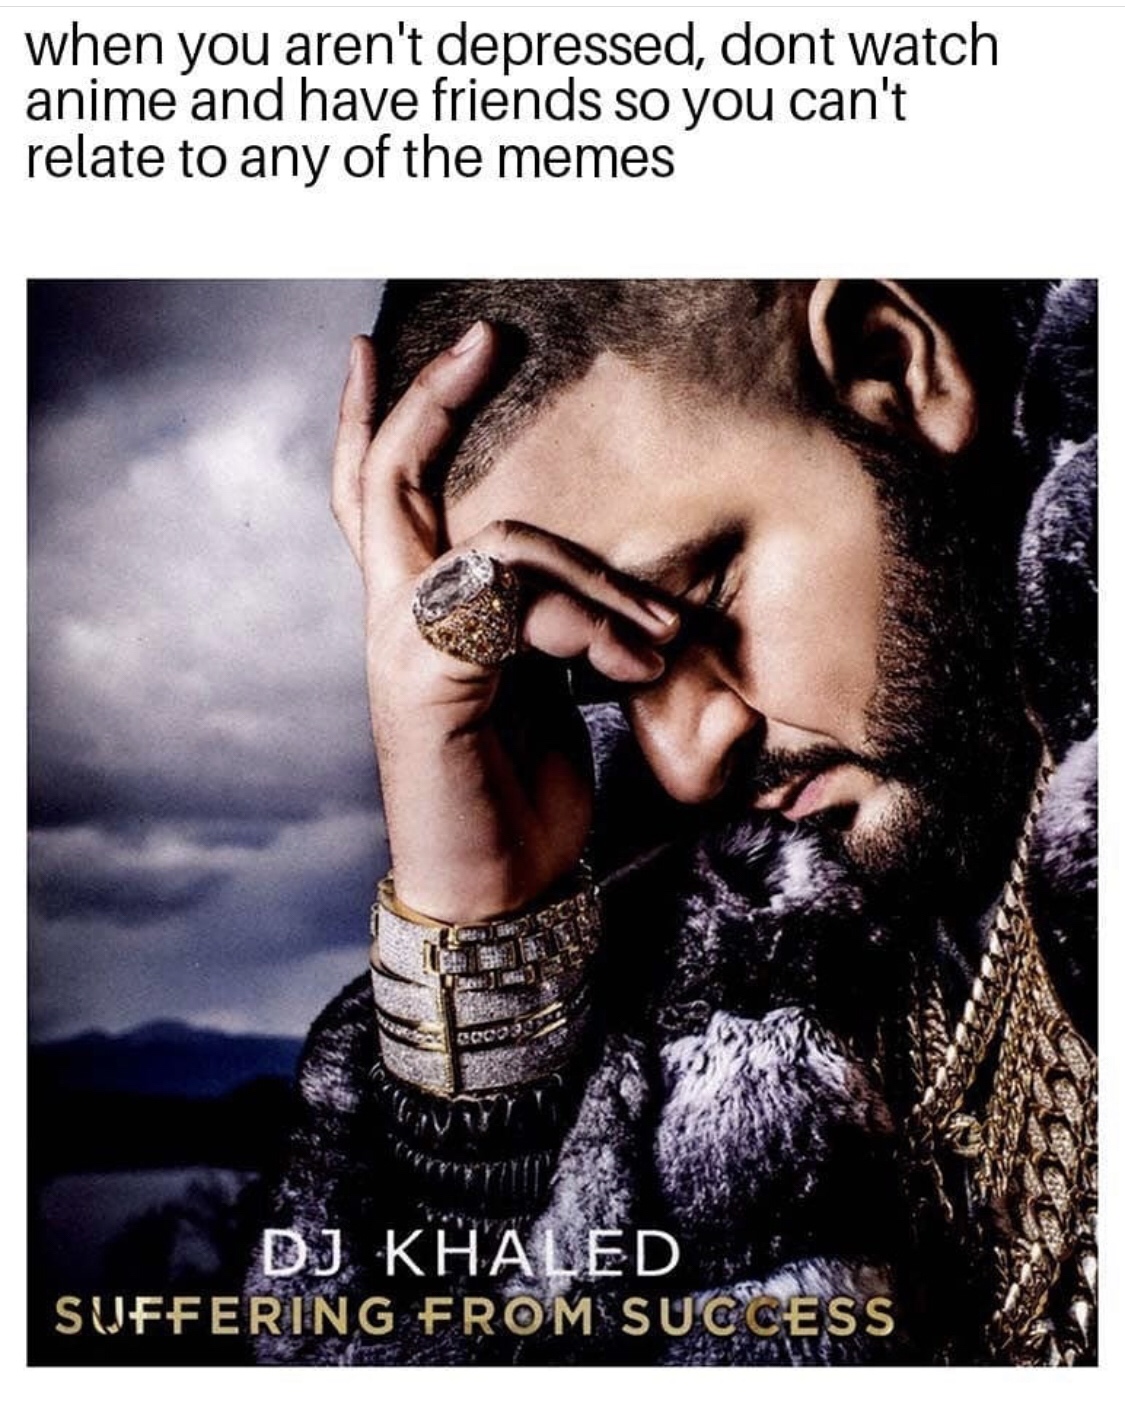 dj khaled suffering from success memes - when you aren't depressed, dont watch anime and have friends so you can't relate to any of the memes Dj Khaled Suffering From Success